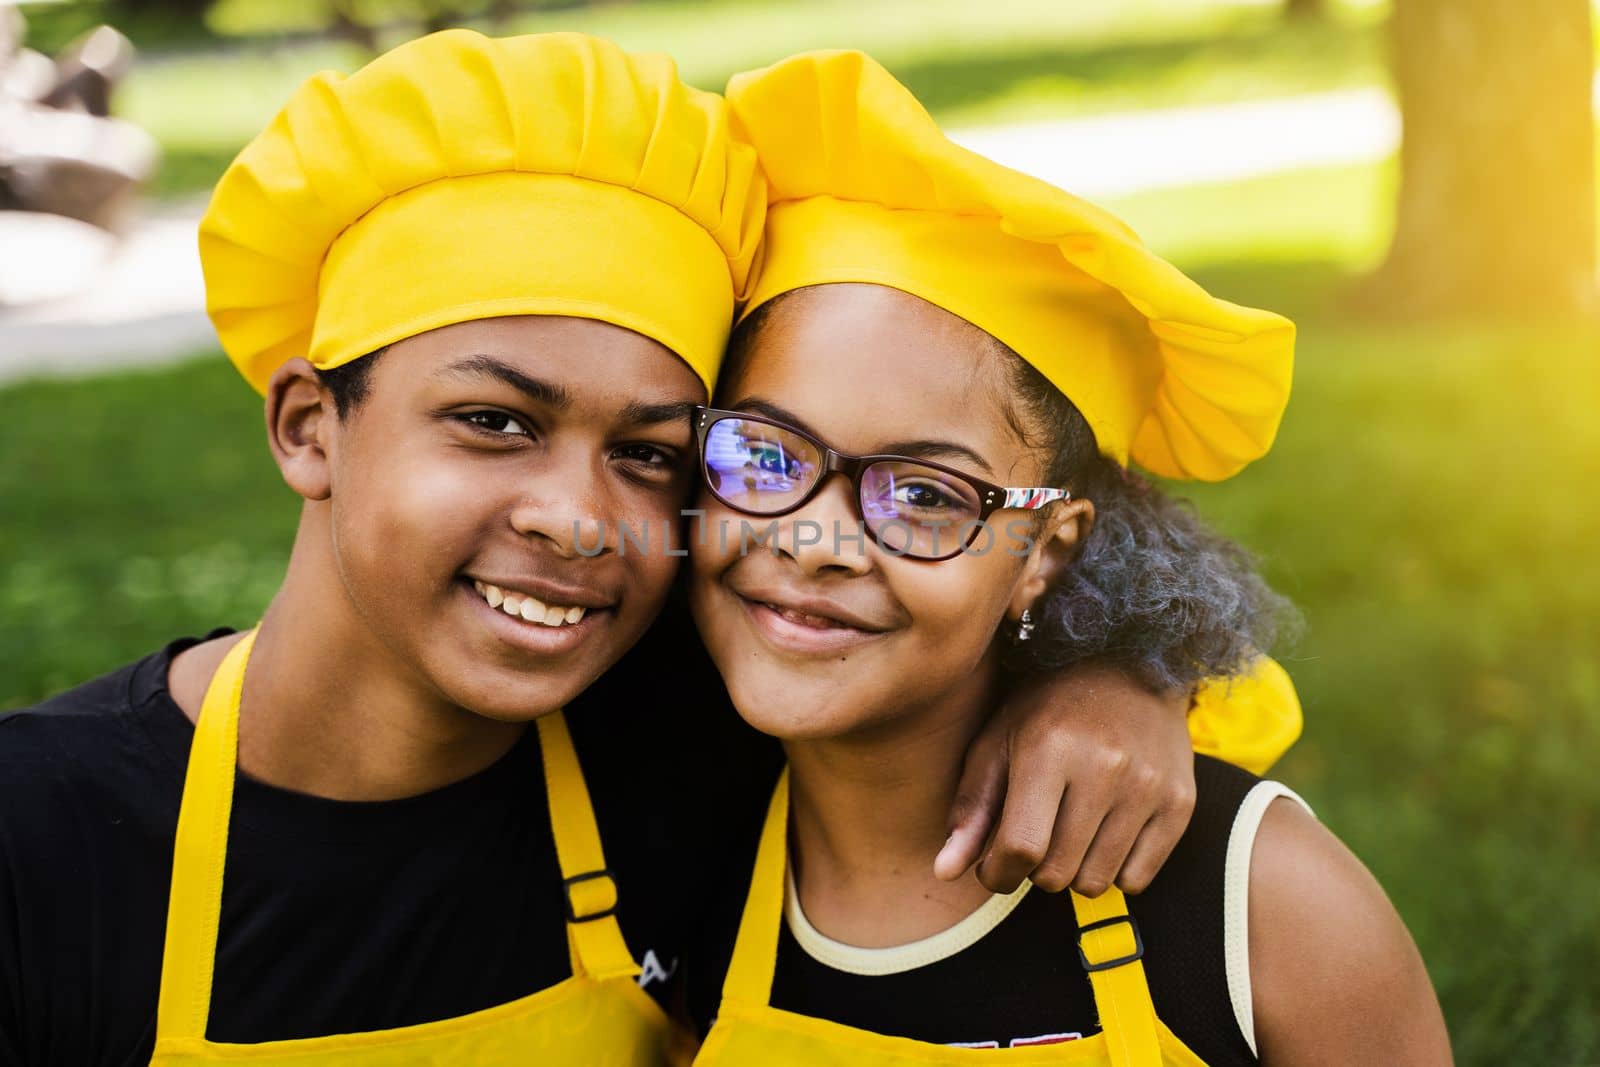 African children cooks in chefs hat and yellow uniforms smiling close-up portrait . African teenager and black girl have fun and cook food